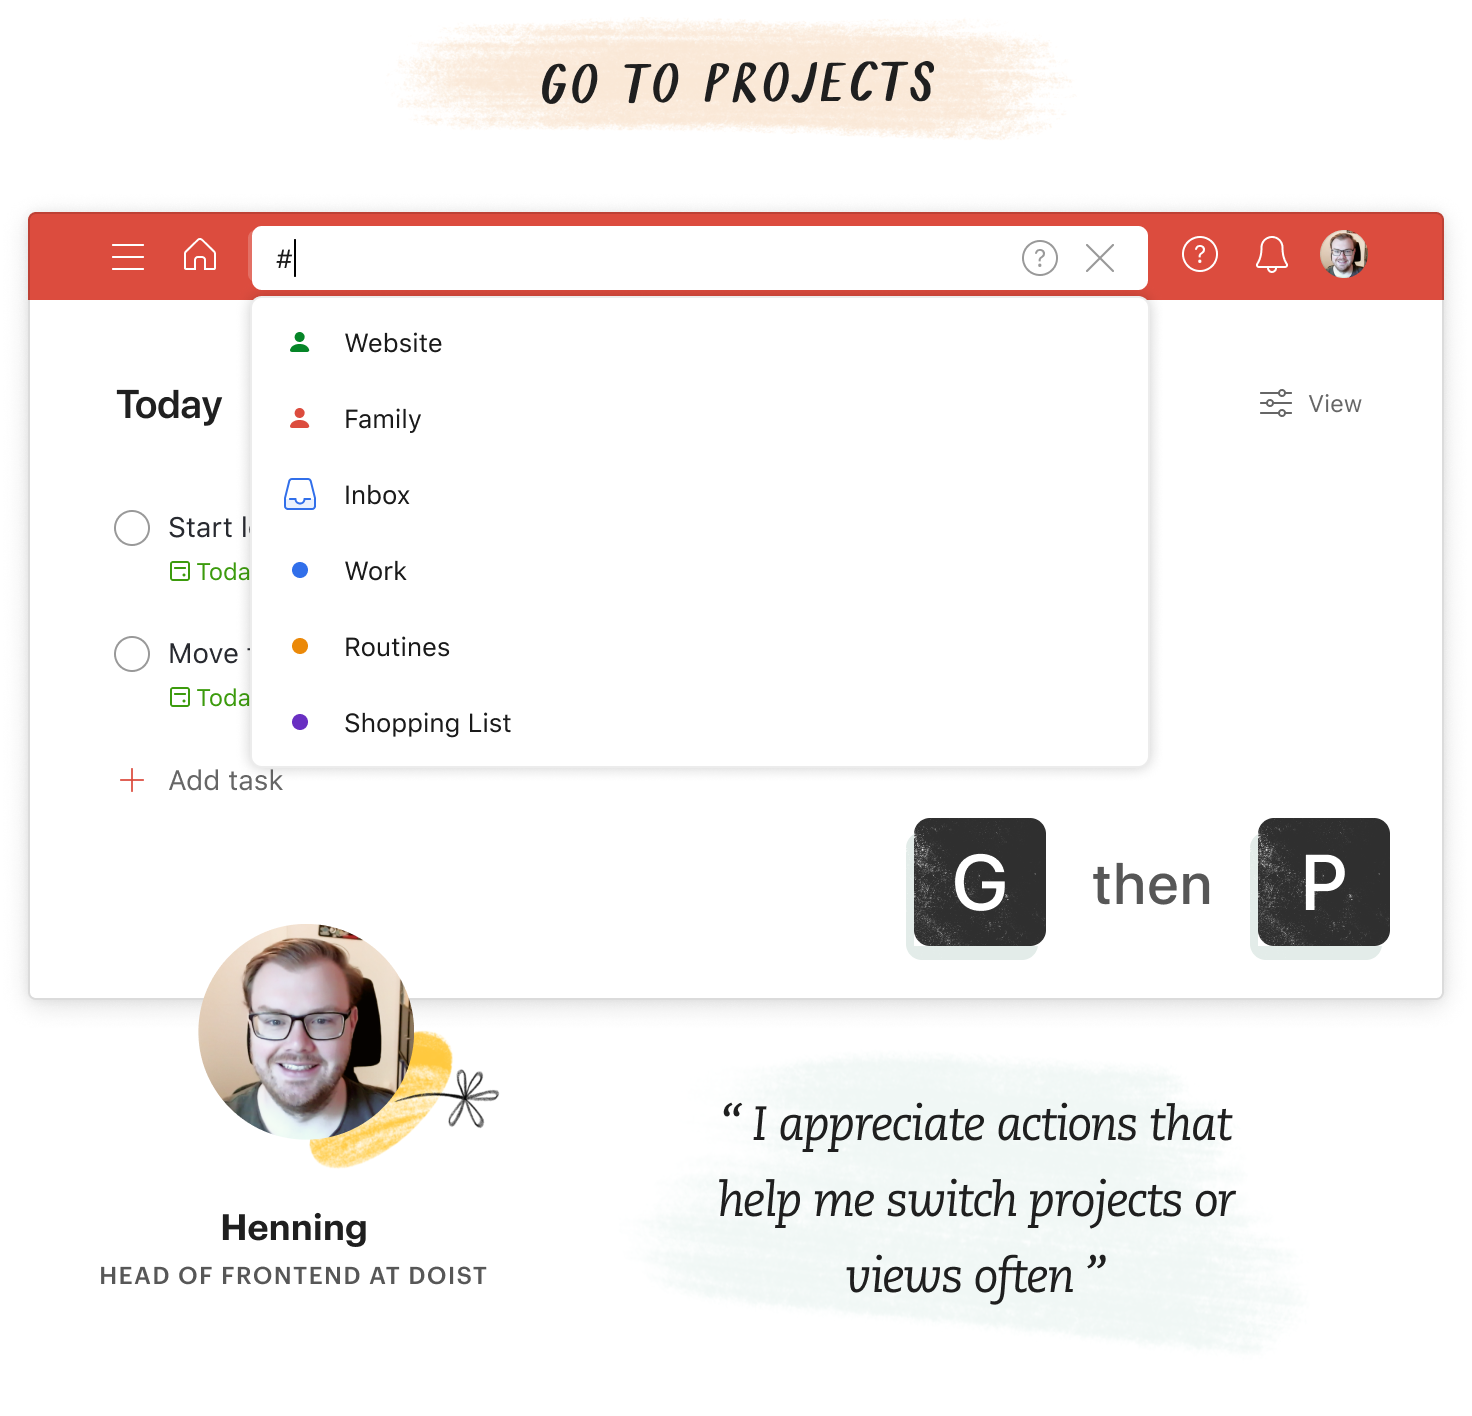 "I appreciate actions that help me switch between projects or views often," said Henning, Head of Frontend at Doist. He uses G then P to go to projects.